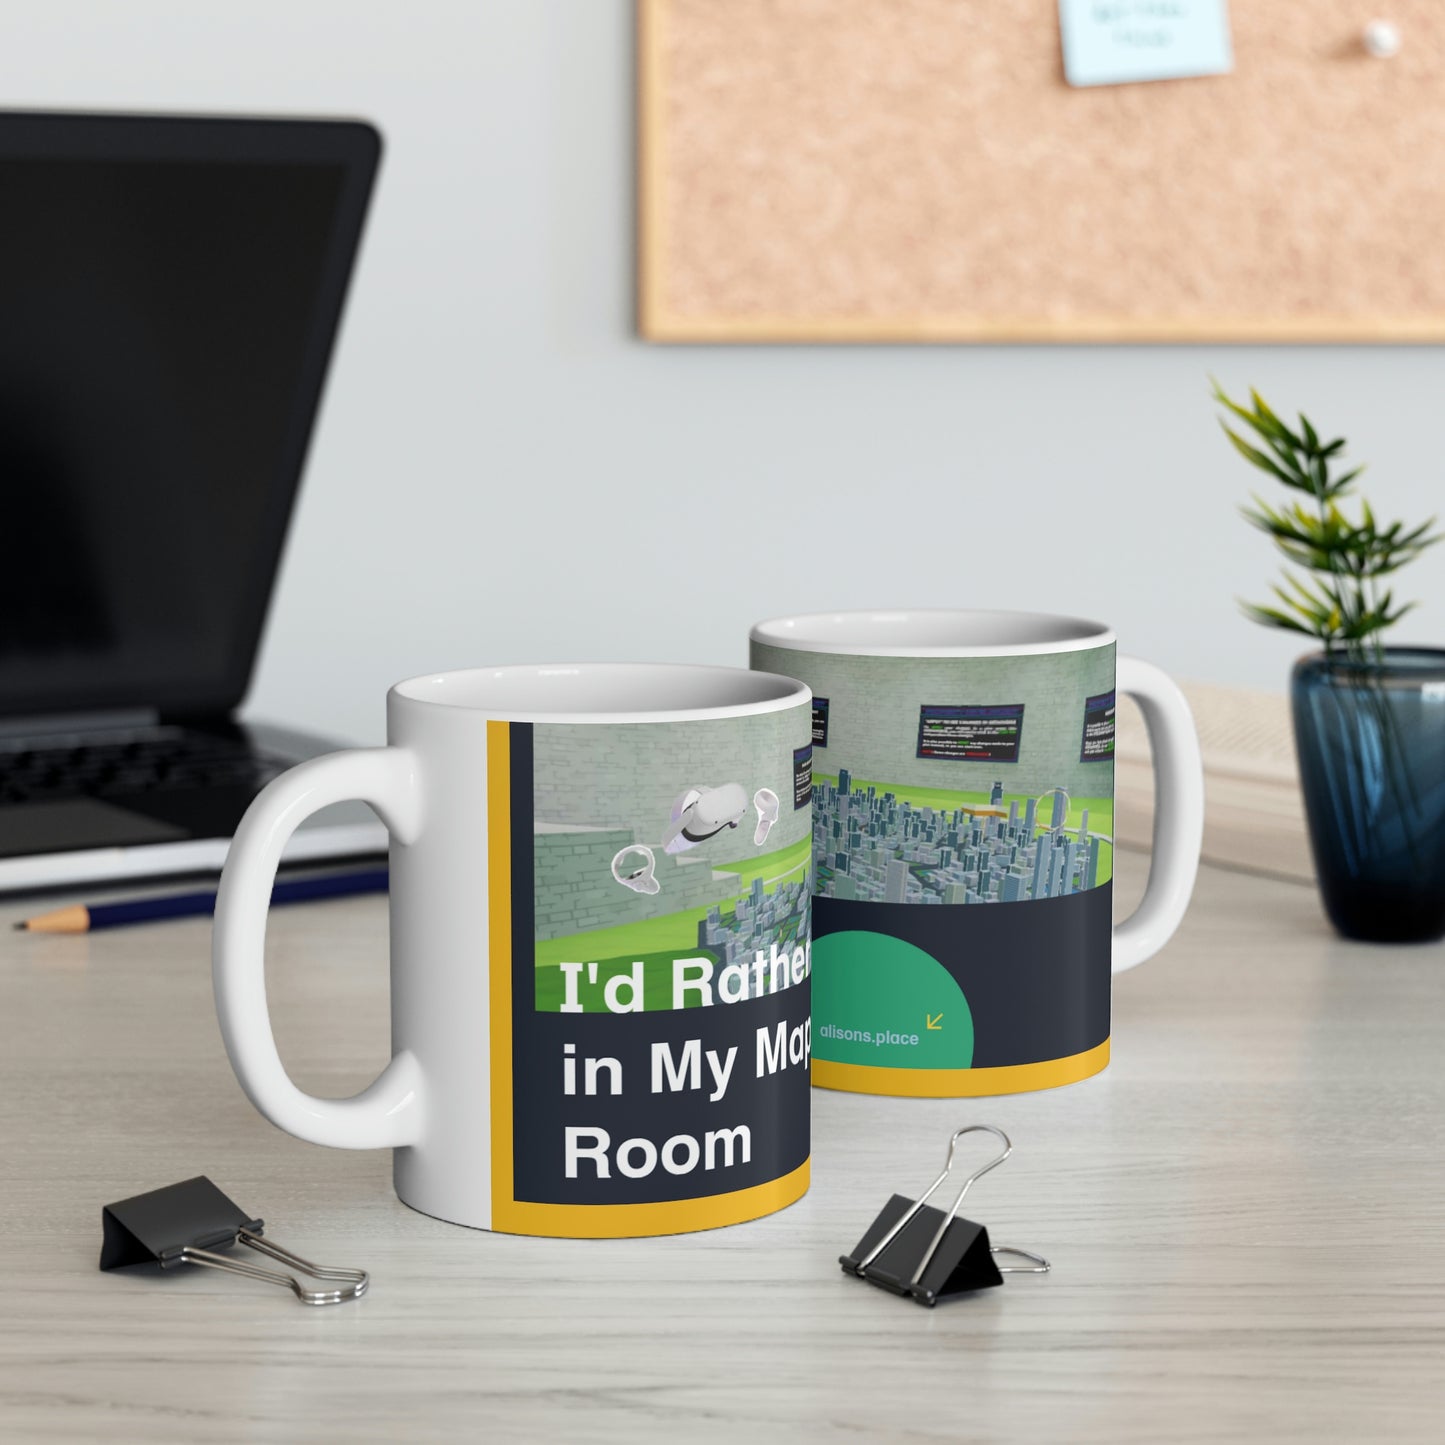 I'd Rather be in My Map Room Mug